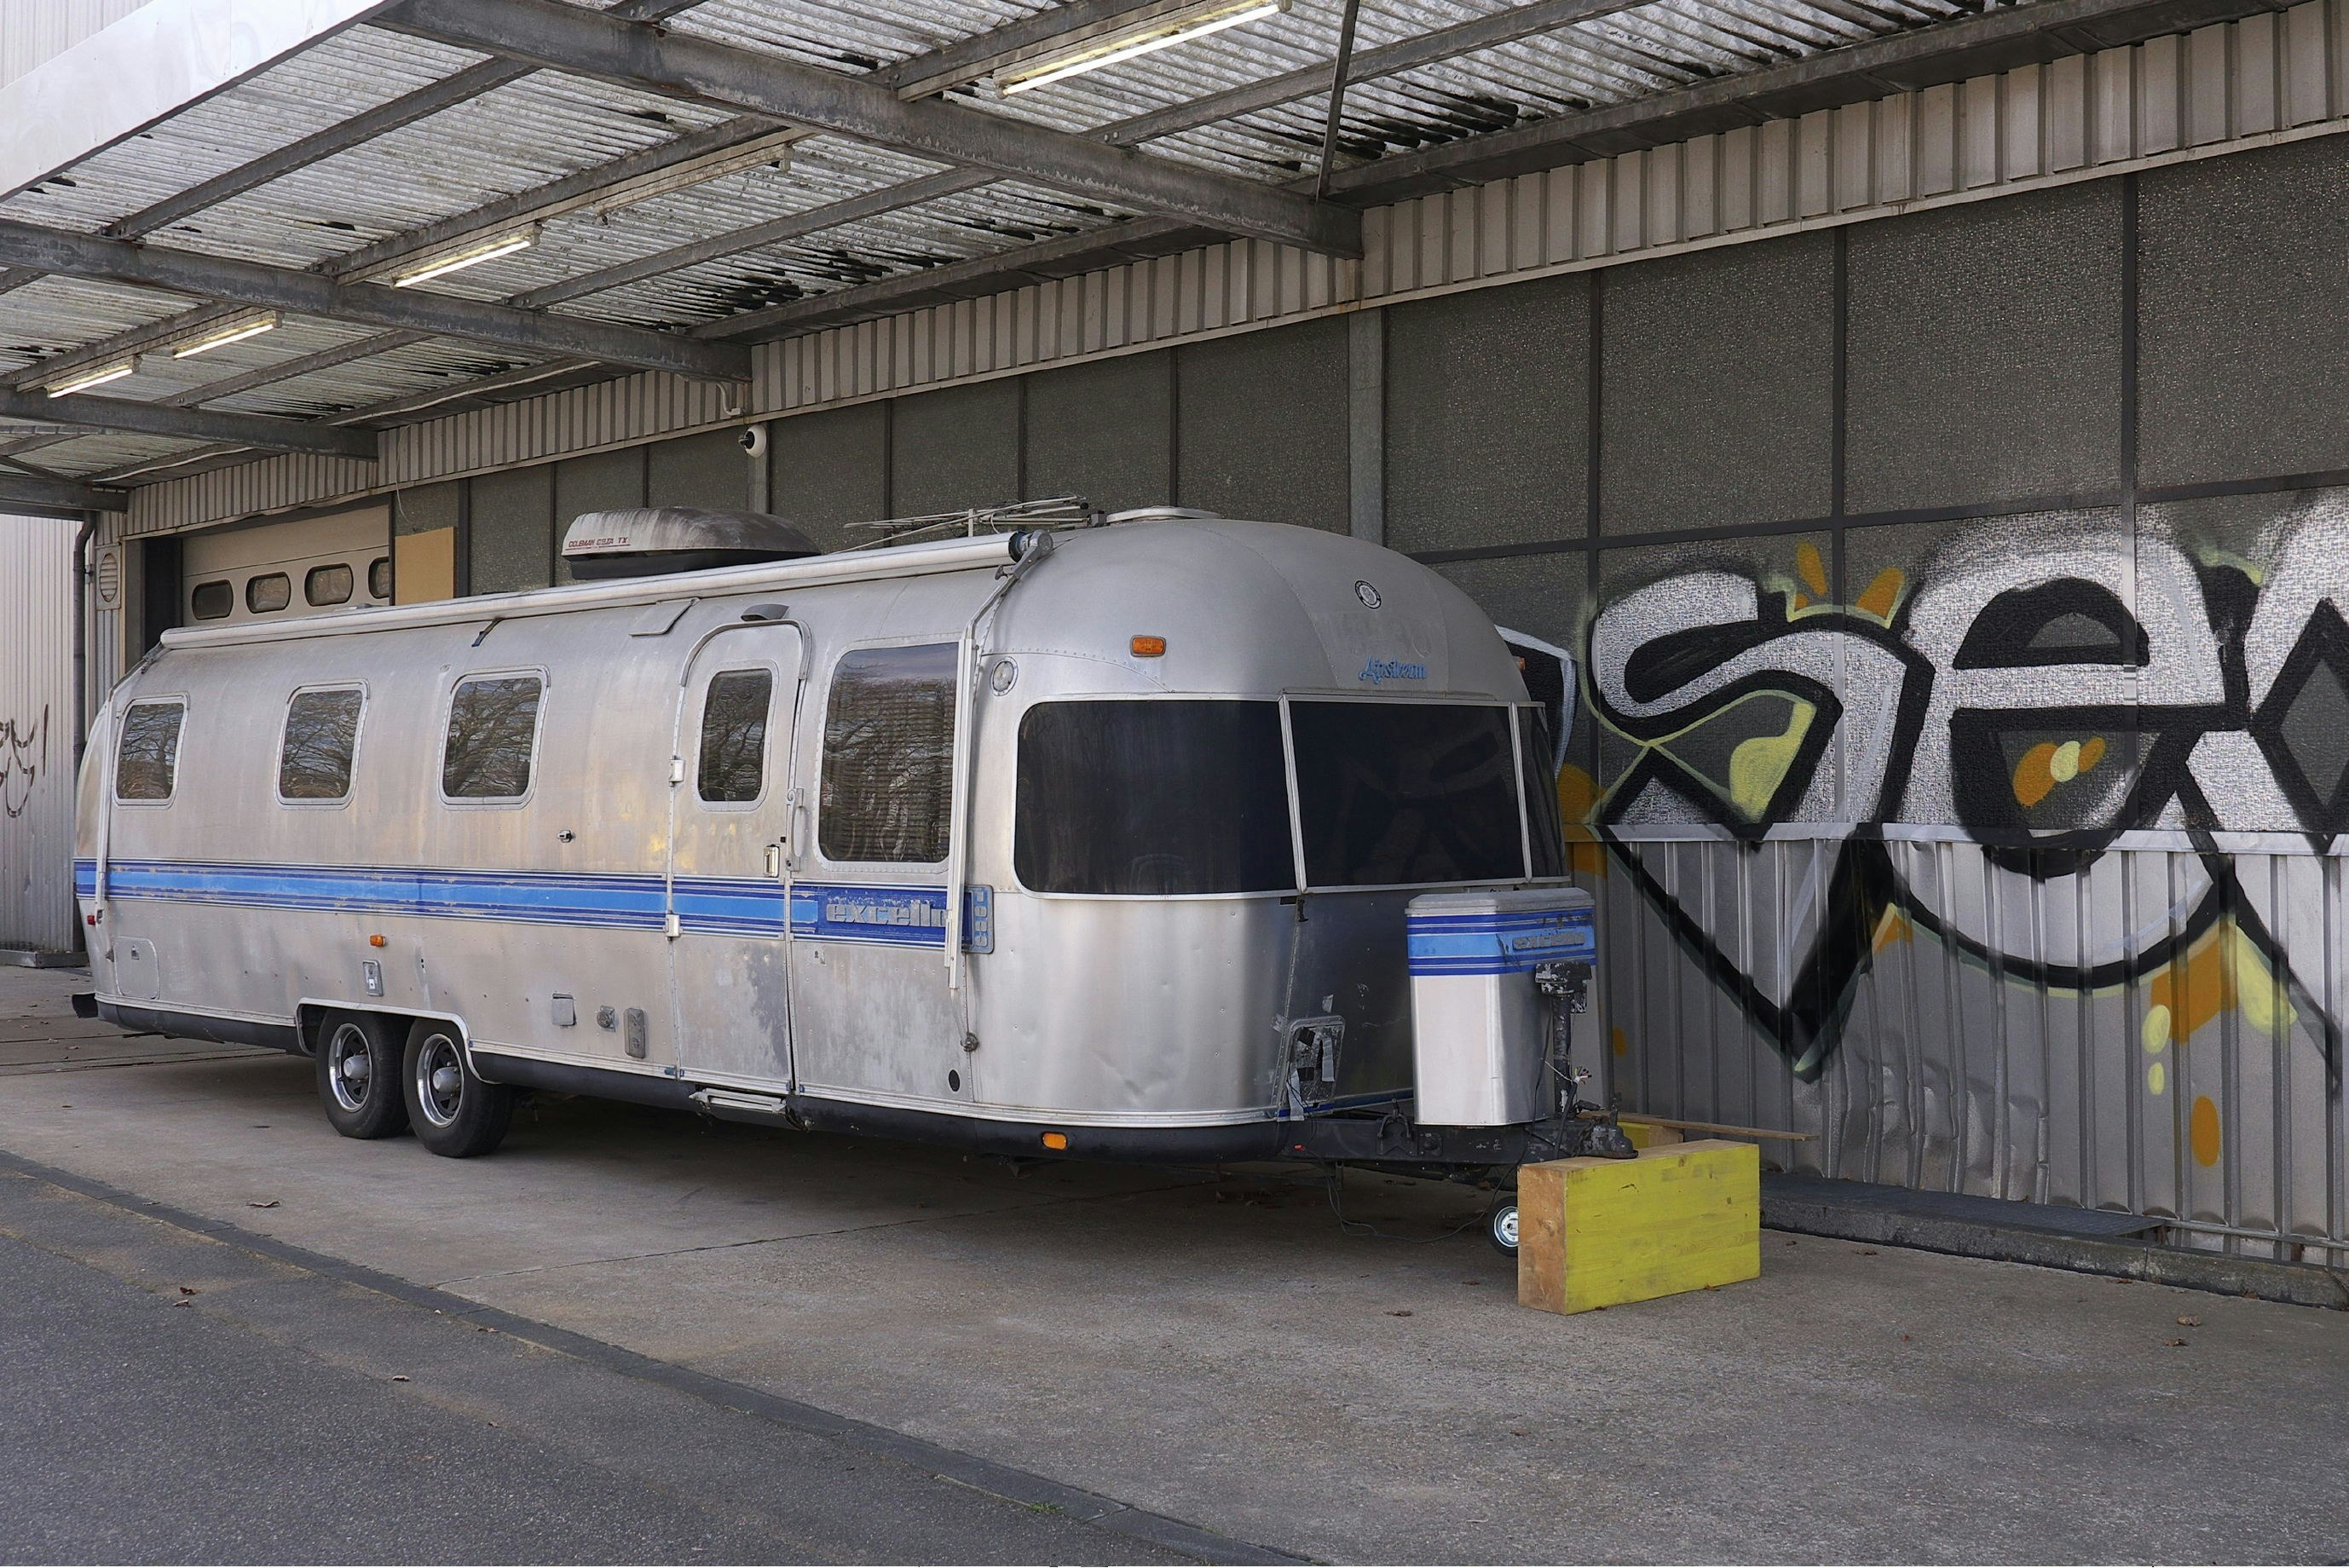 A silver and blue vintage camping trailer sits in front of a concrete wall decorated with graffiti in Bonn, Germany